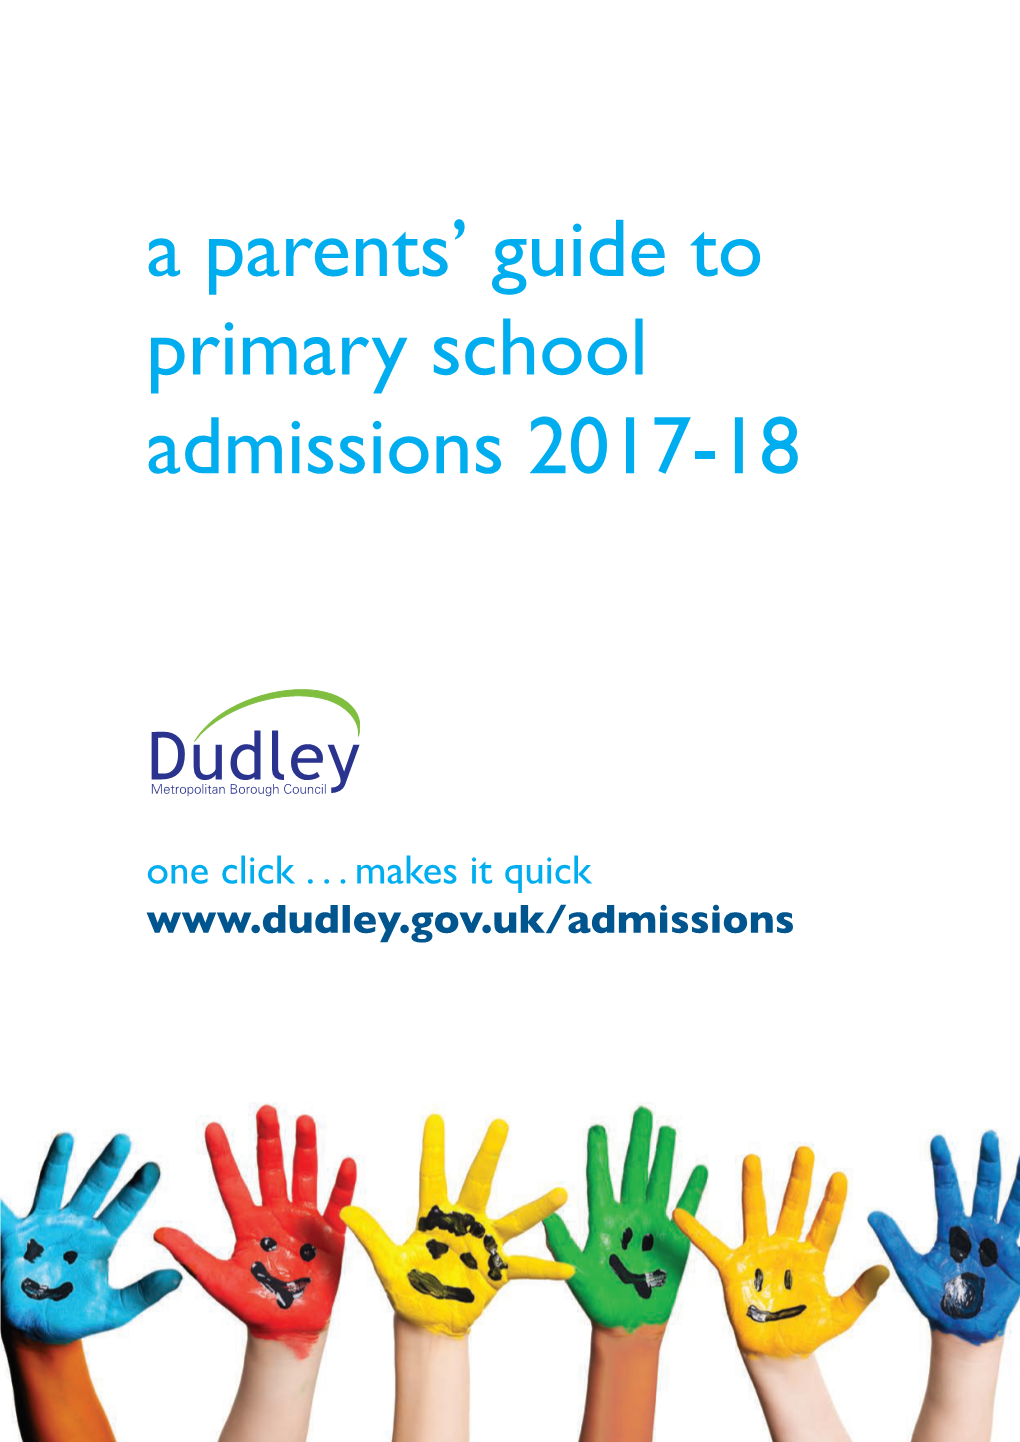 A Parents' Guide to Primary School Admissions 2017-18